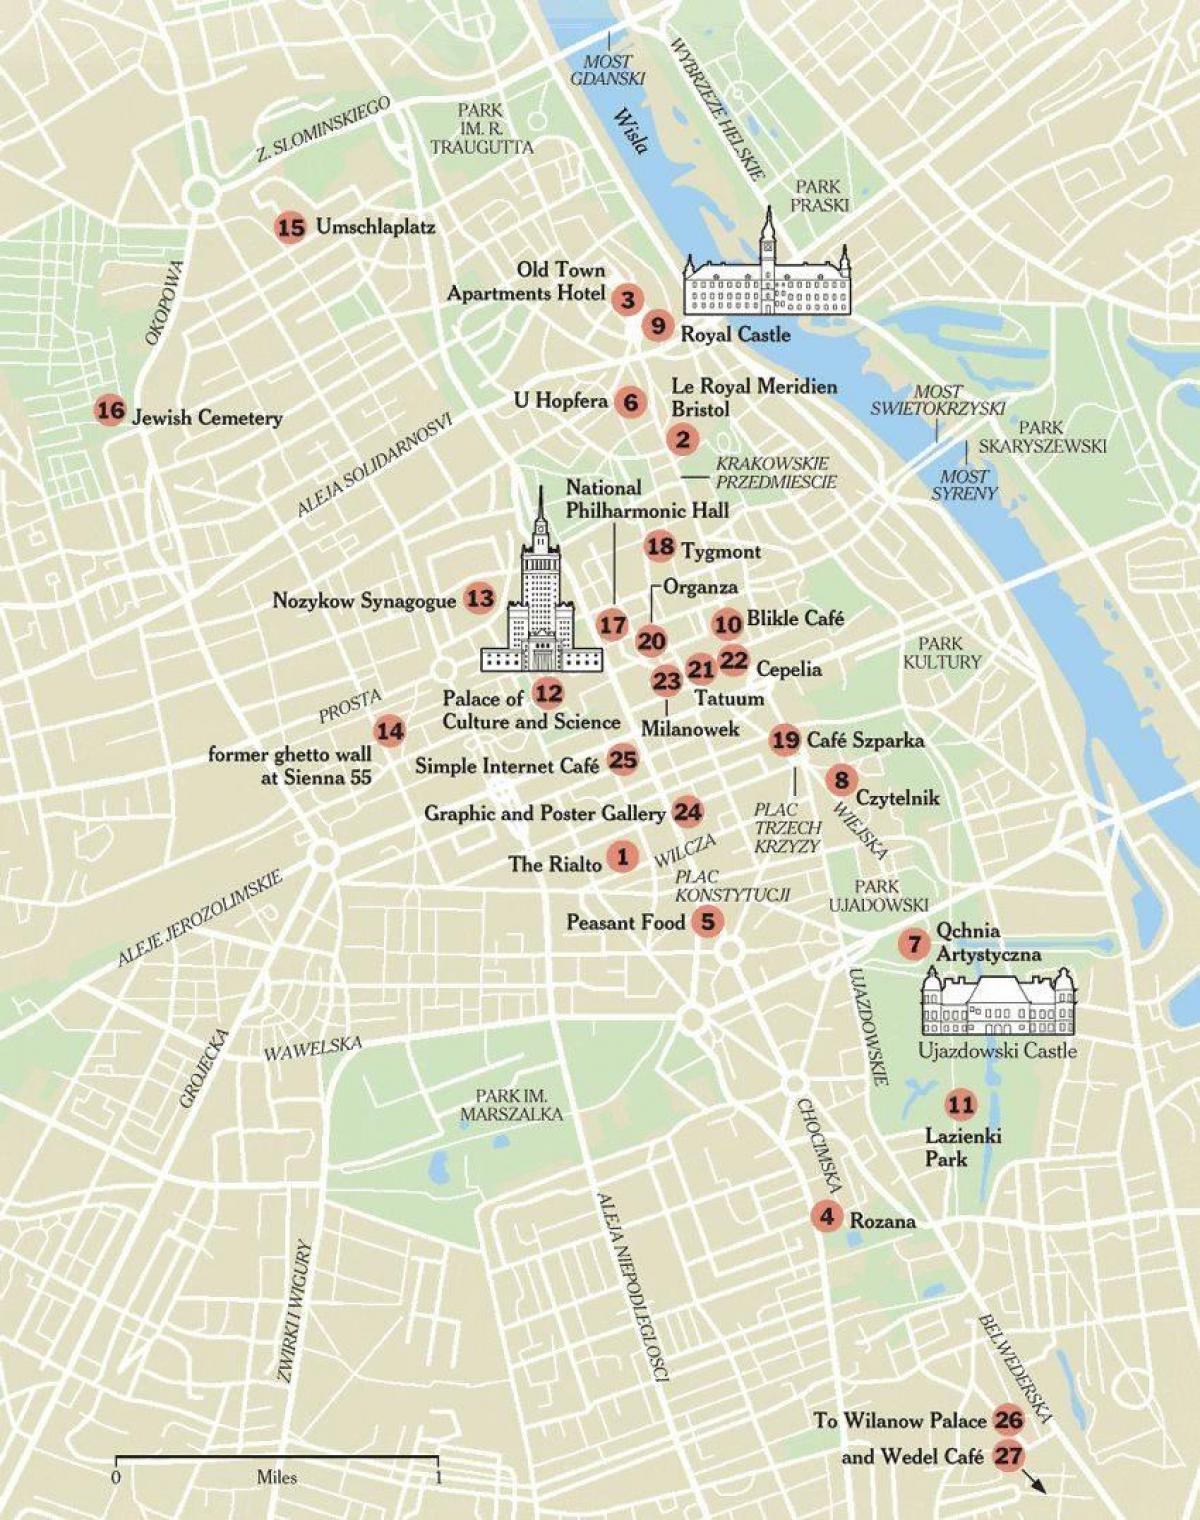 map of Warsaw with tourist attractions